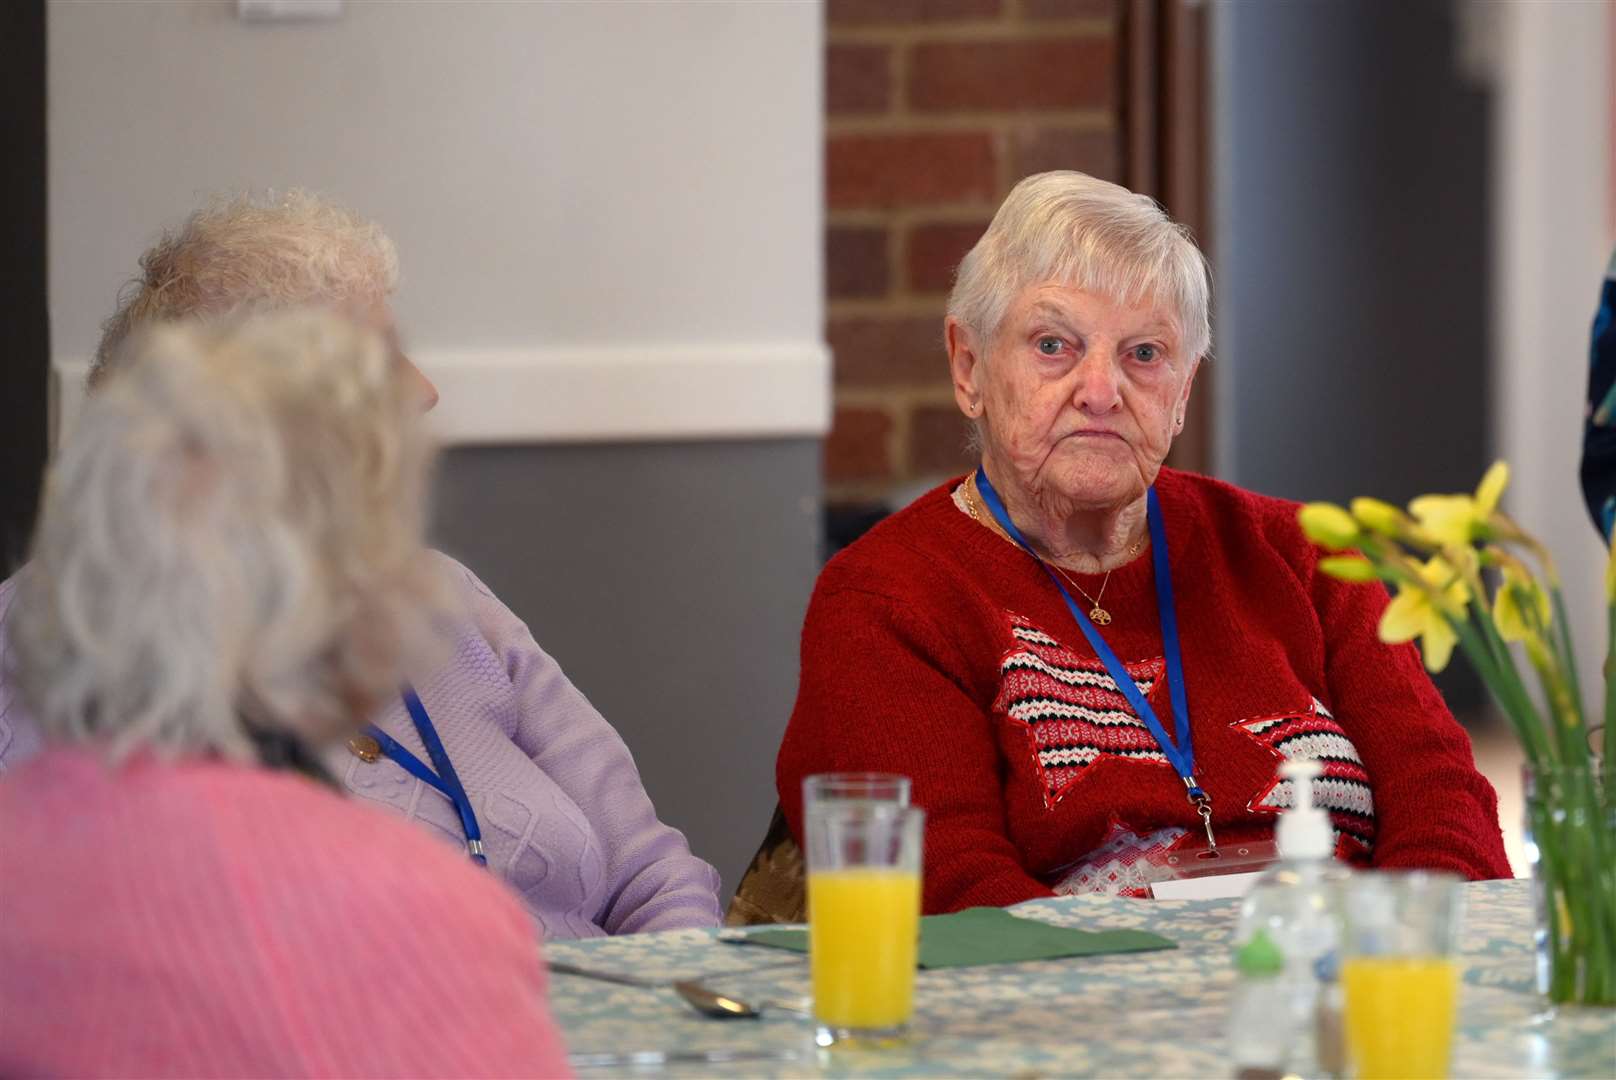 Forget-me-knot lunch club at Gaywood Church Rooms celebrating 56th birthday. (63273661)